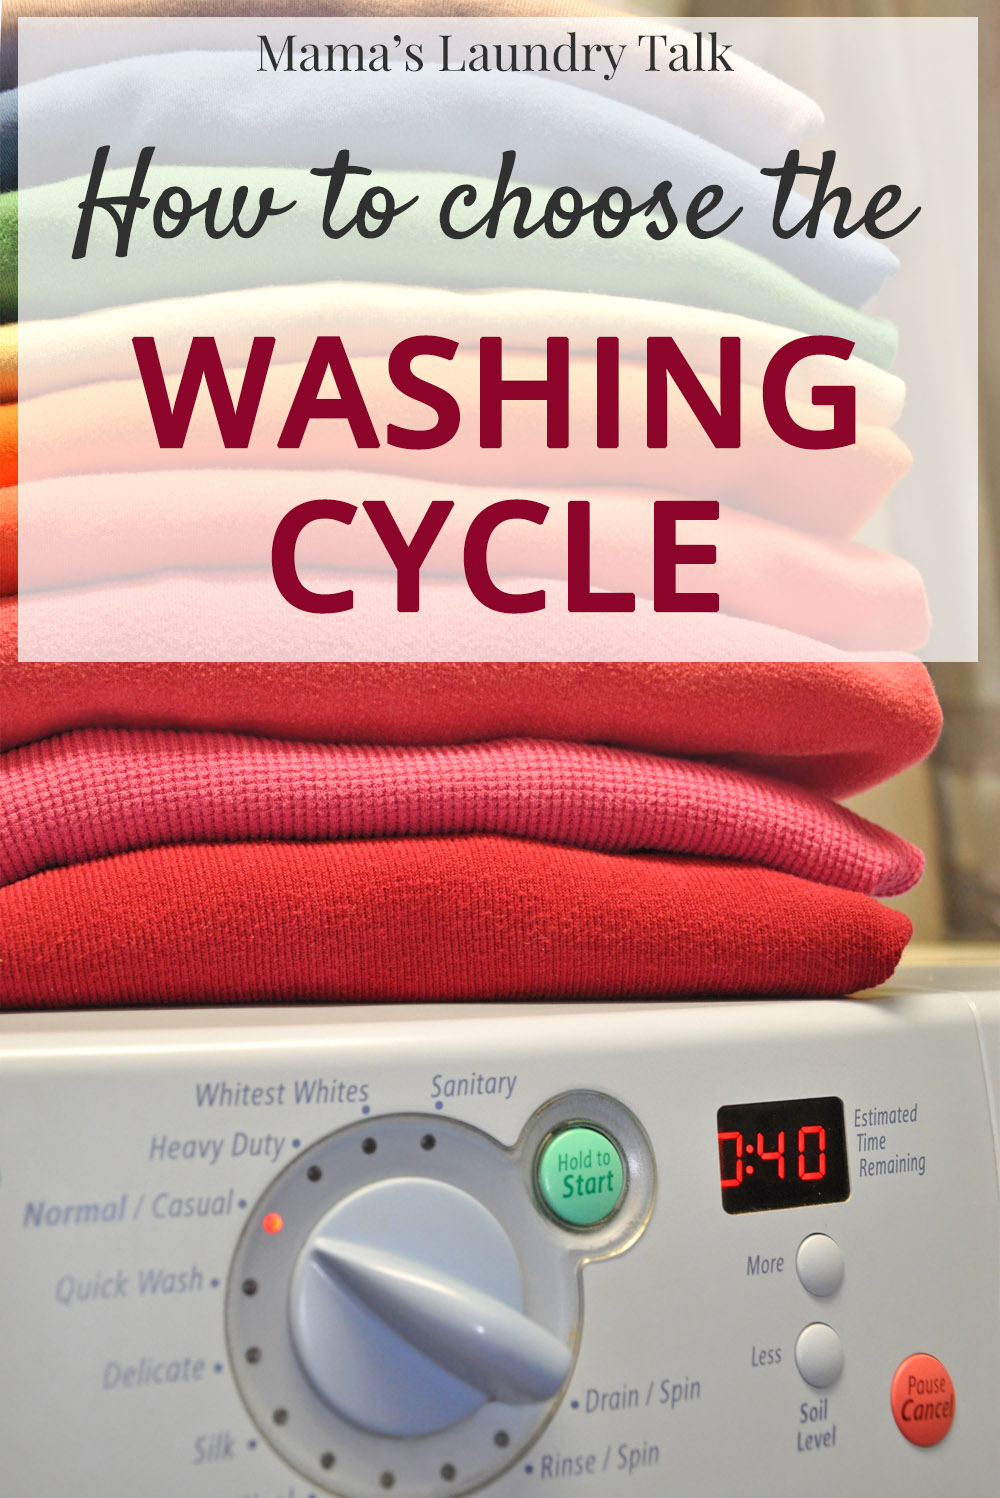 Regular Laundry Machine Maintenance and Why It's Important